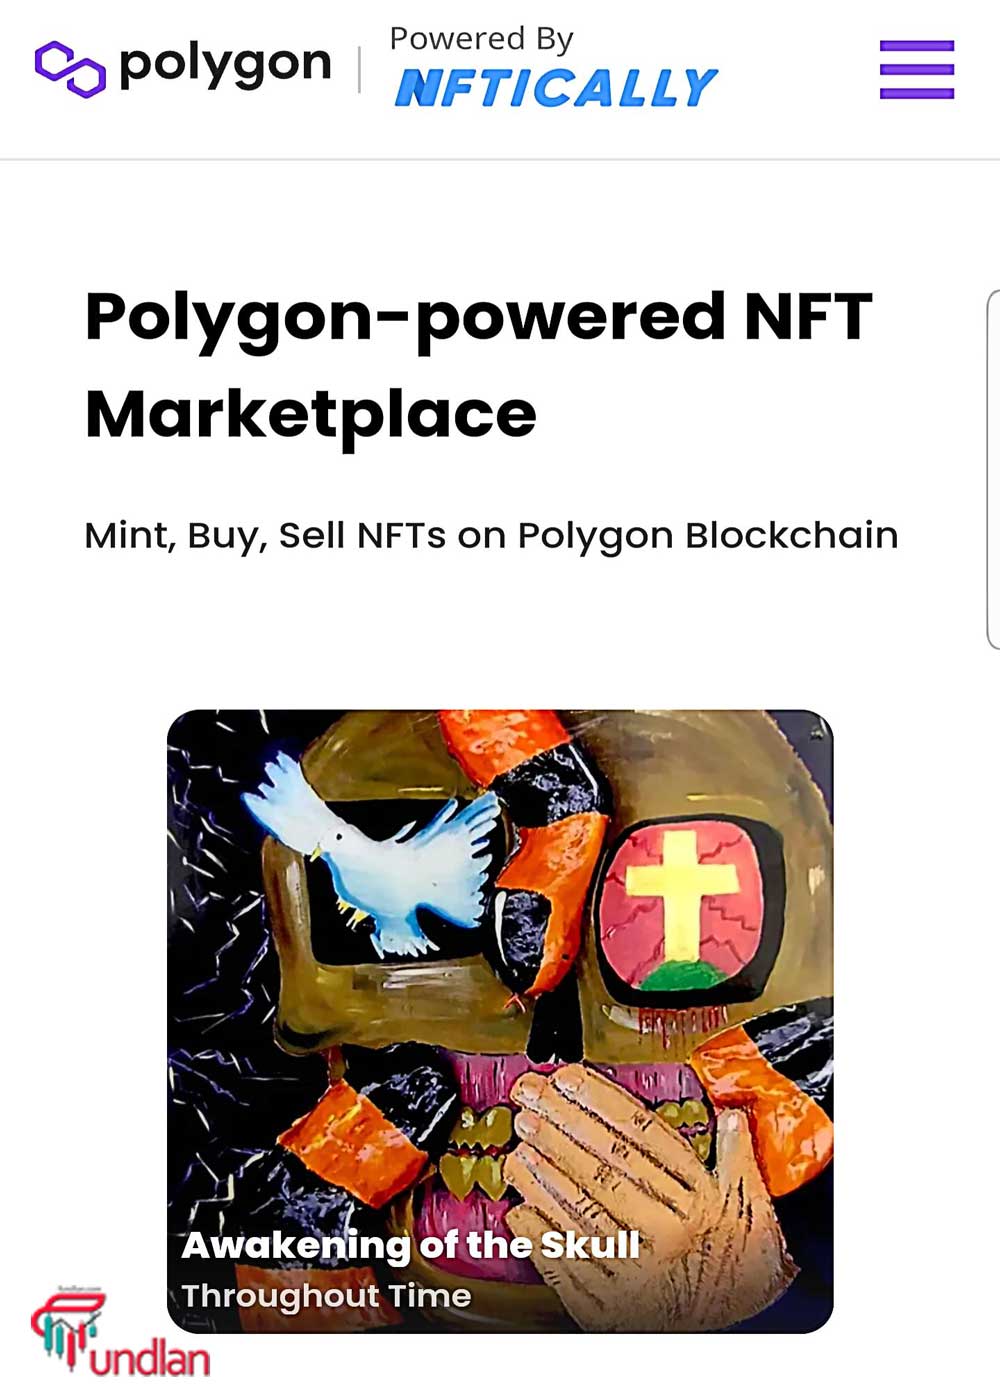 How much does it cost to mint nft on polygon?